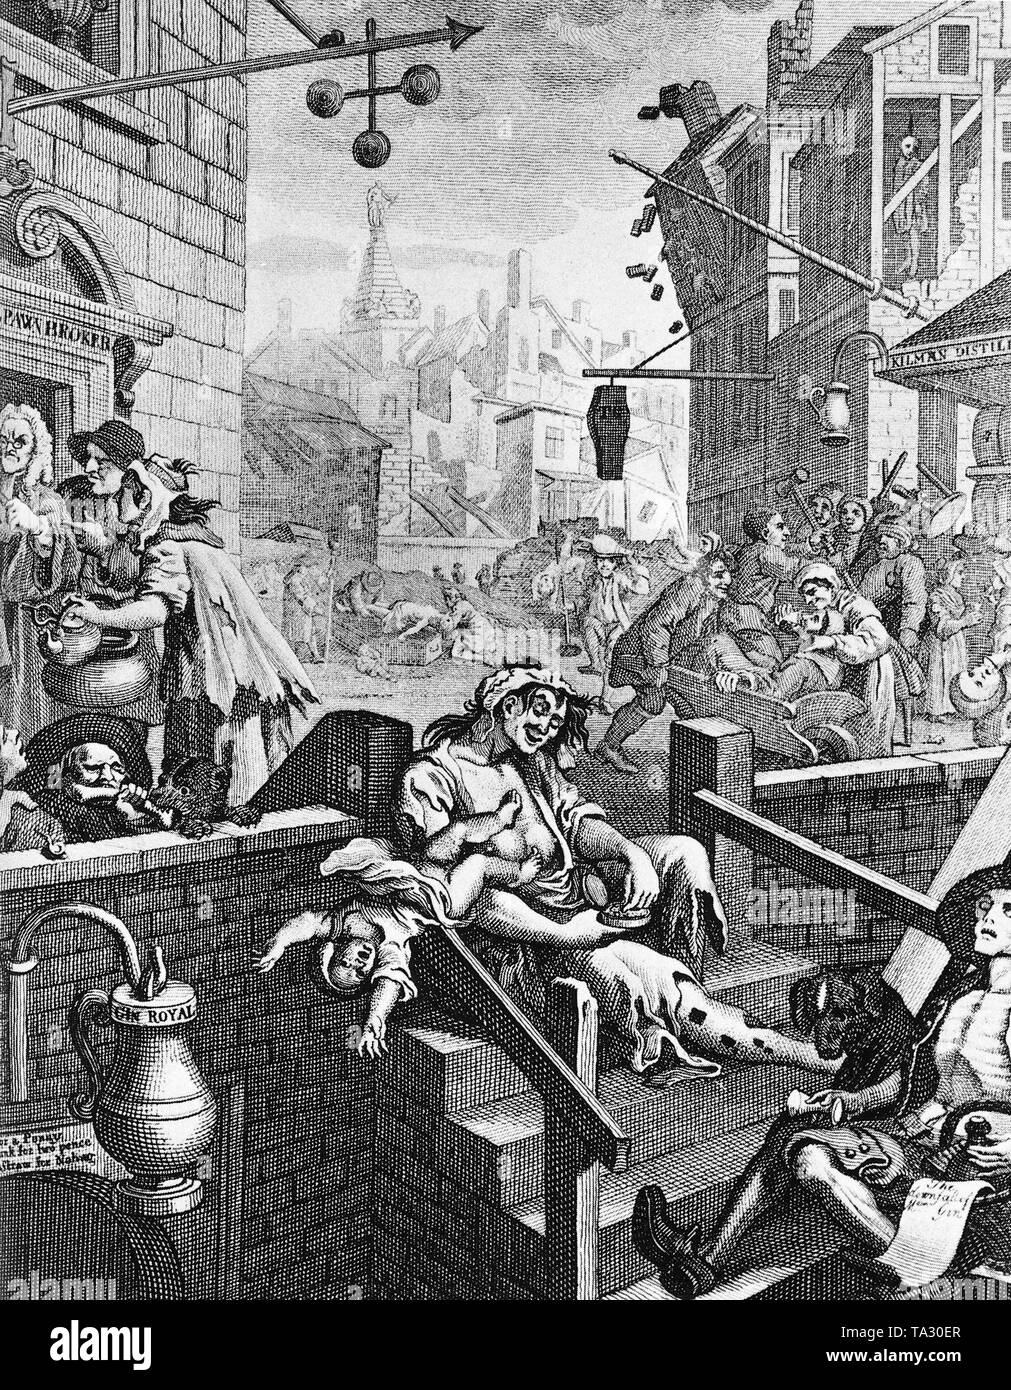 The engraving 'Gin Lane' (1751) by William Hogarth (1697-1764) depicts the misery in London in the 18th century. Hogarth draws a picture of London characterized by alcoholism and drug addiction. The mother in the foreground for example lets her baby fall while she takes a pinch of snuff. Stock Photo